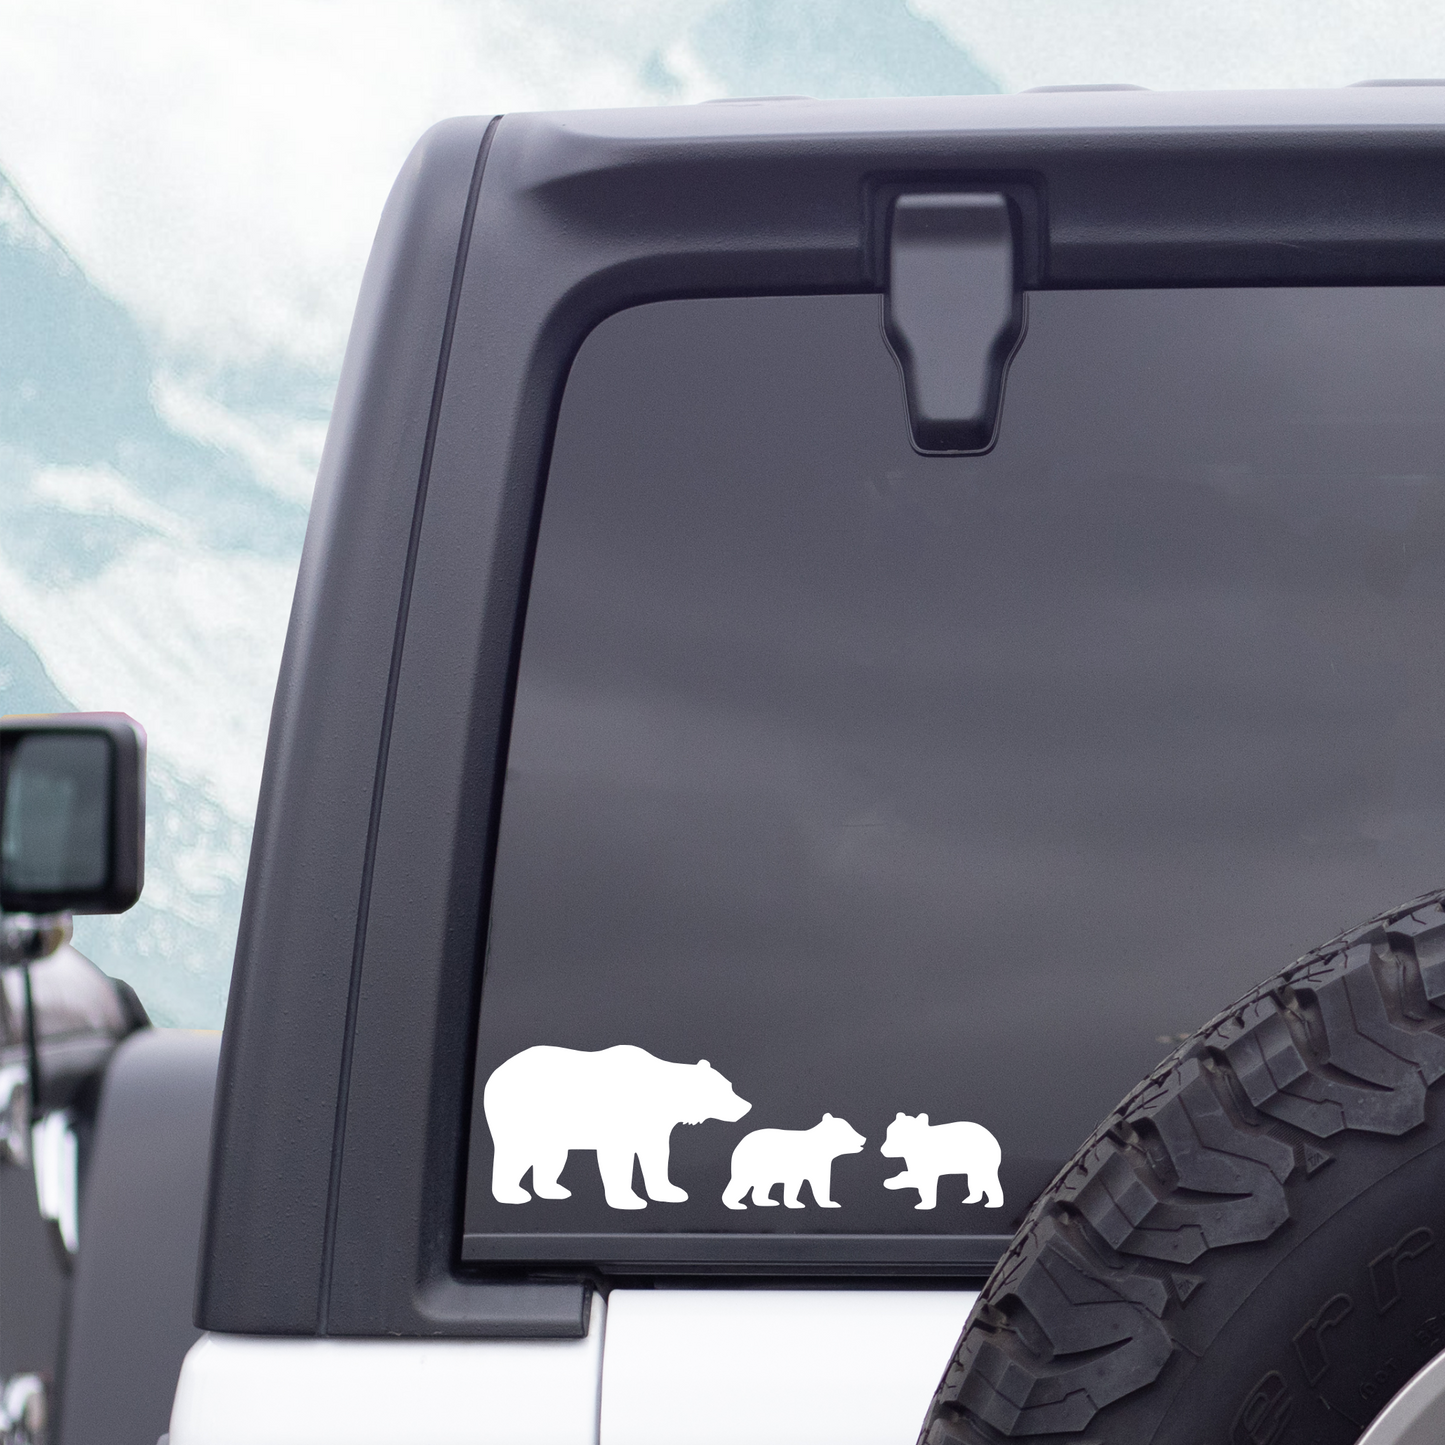 Bear and Cubs Vinyl Decal for Car Window, Wildlife Family Sticker, Forest Animal